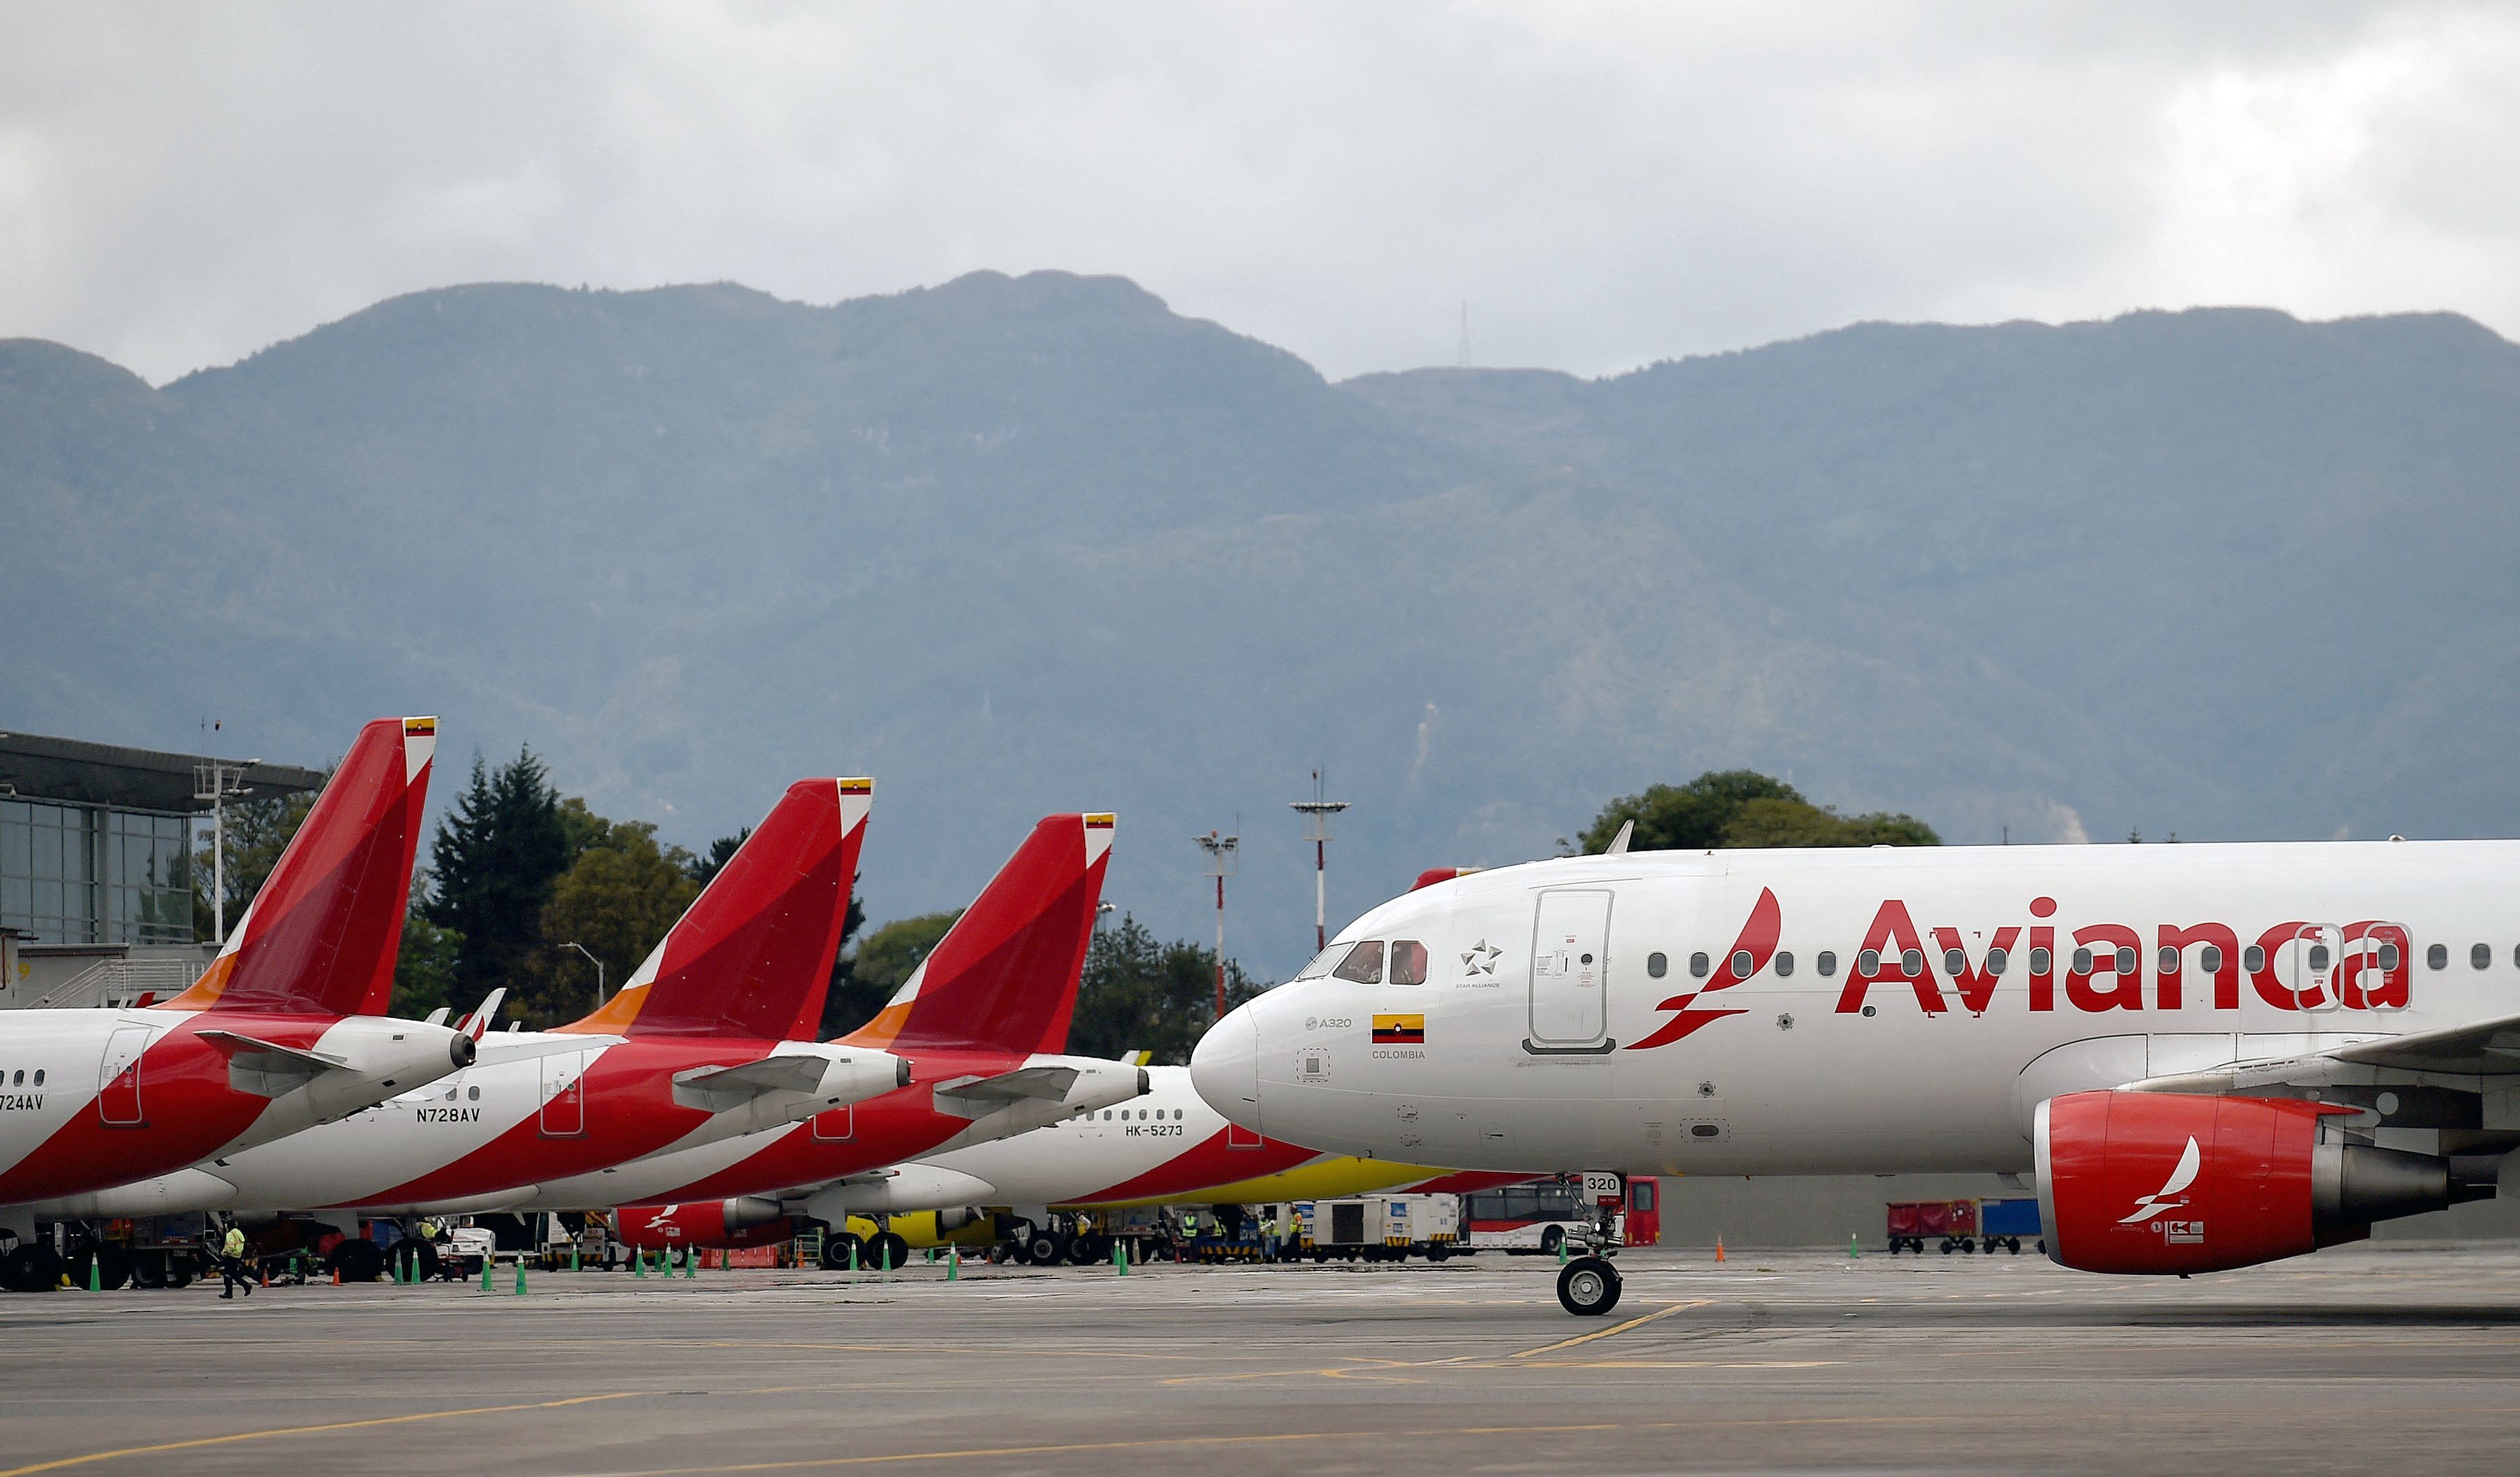 Several Avianca aircraft lined up